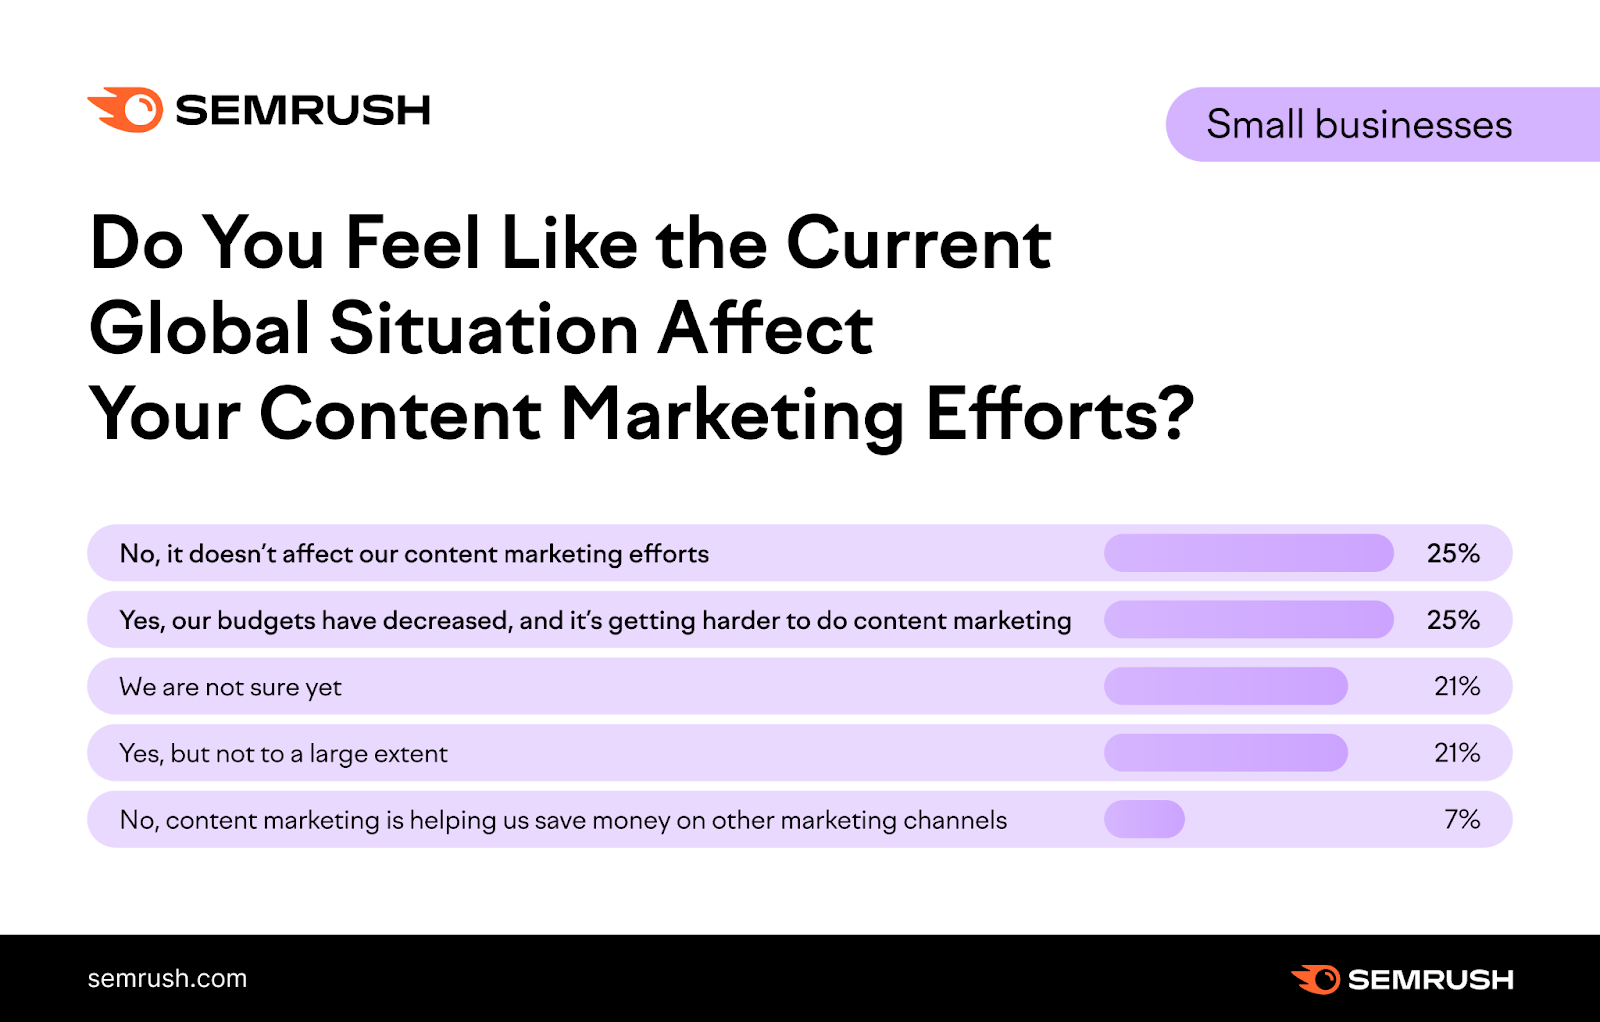 Small businesses and ،w crisis impacts their content marketing